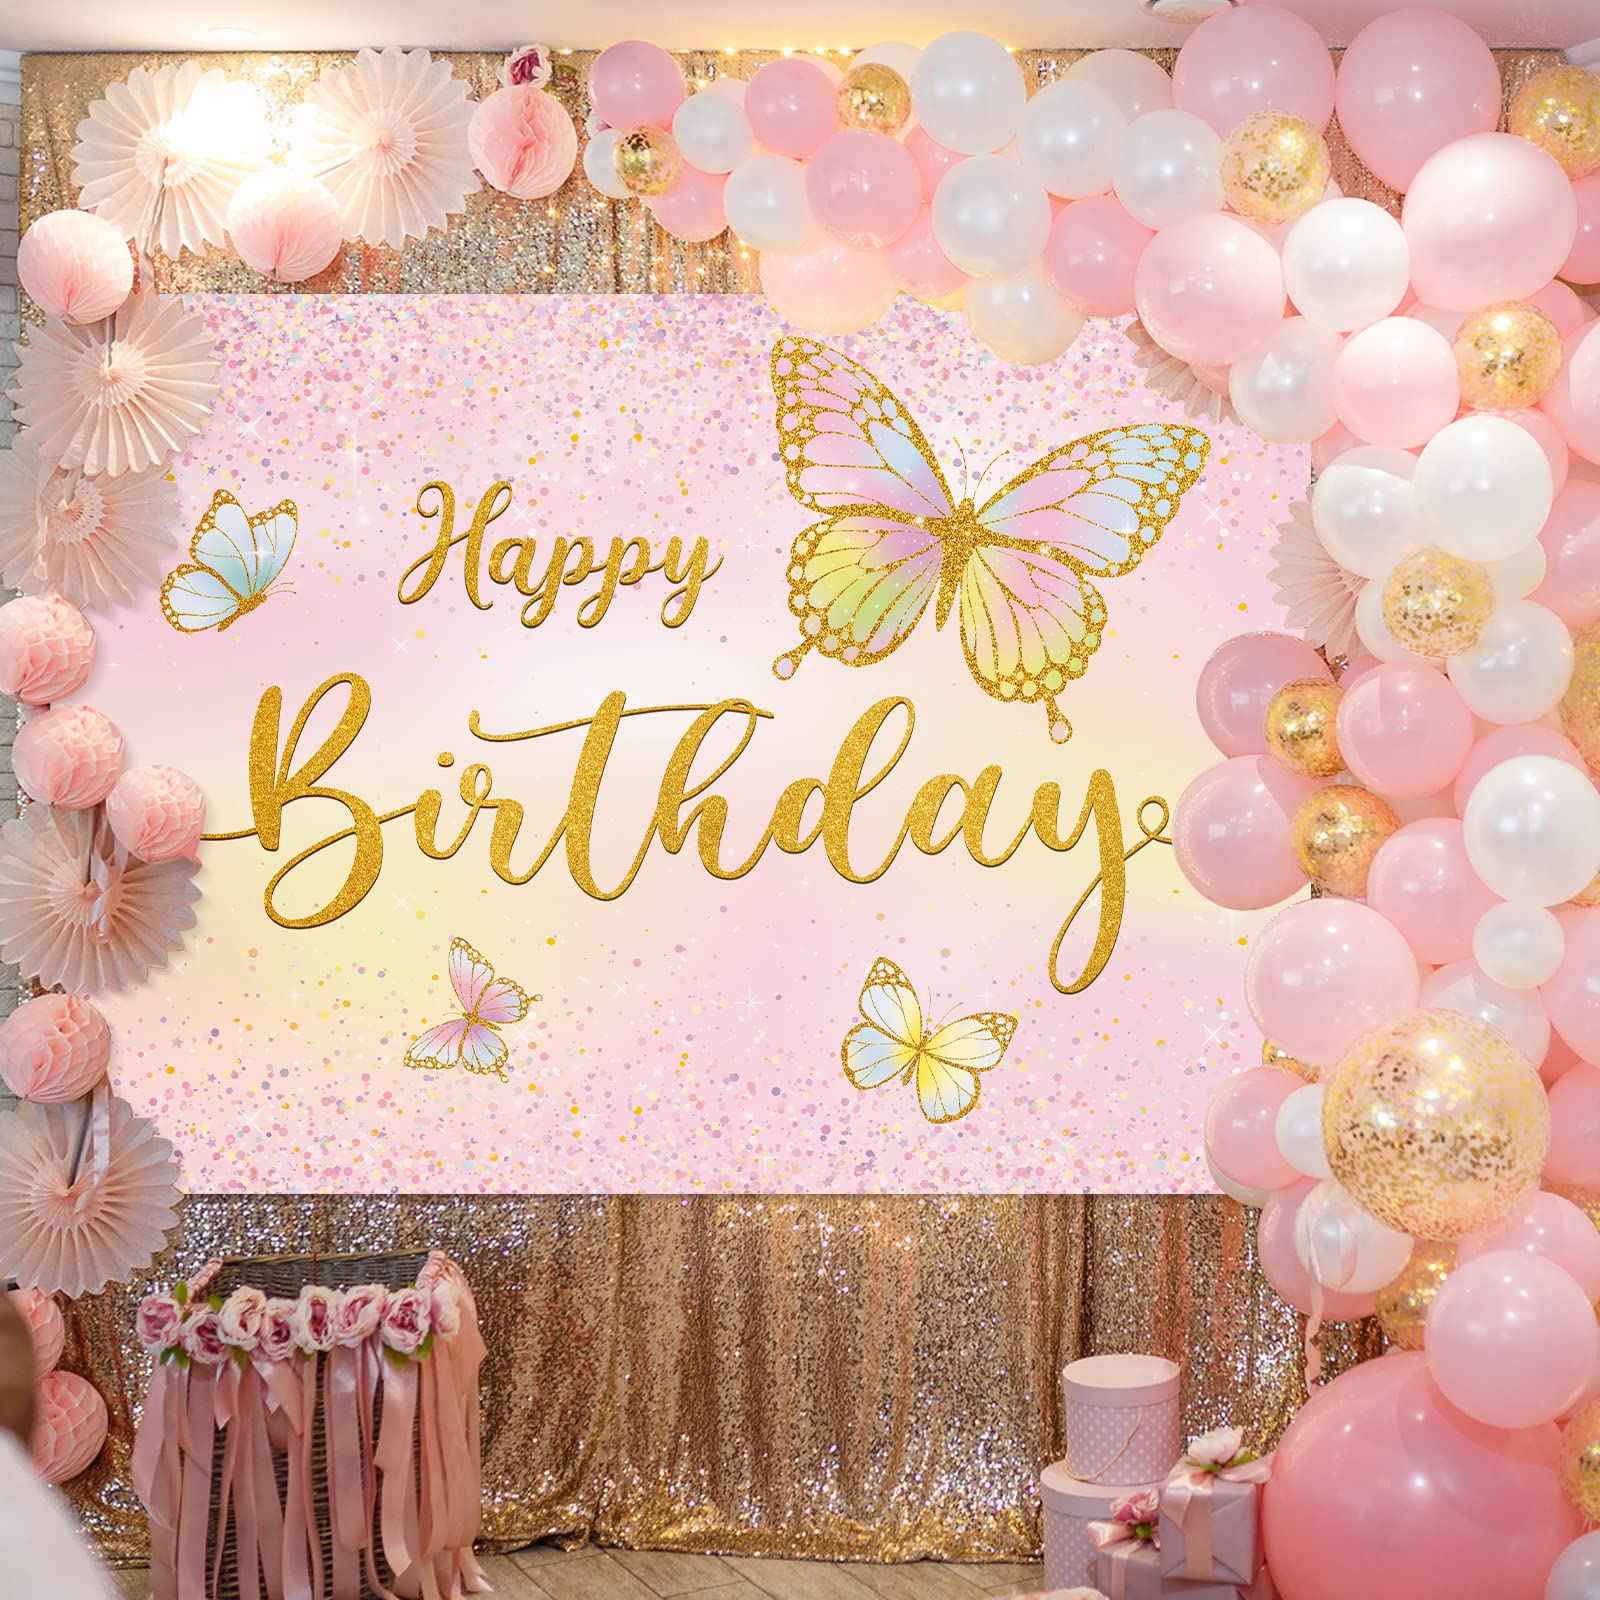 Dandat 7 x 5 ft Butterfly Happy Birthday Backdrop Pink Theme Gold Butterfly Birthday Party Decorations Polyester Spring Banner Baby Girls Princess Photography Background for Bday Photo Shoot Prop